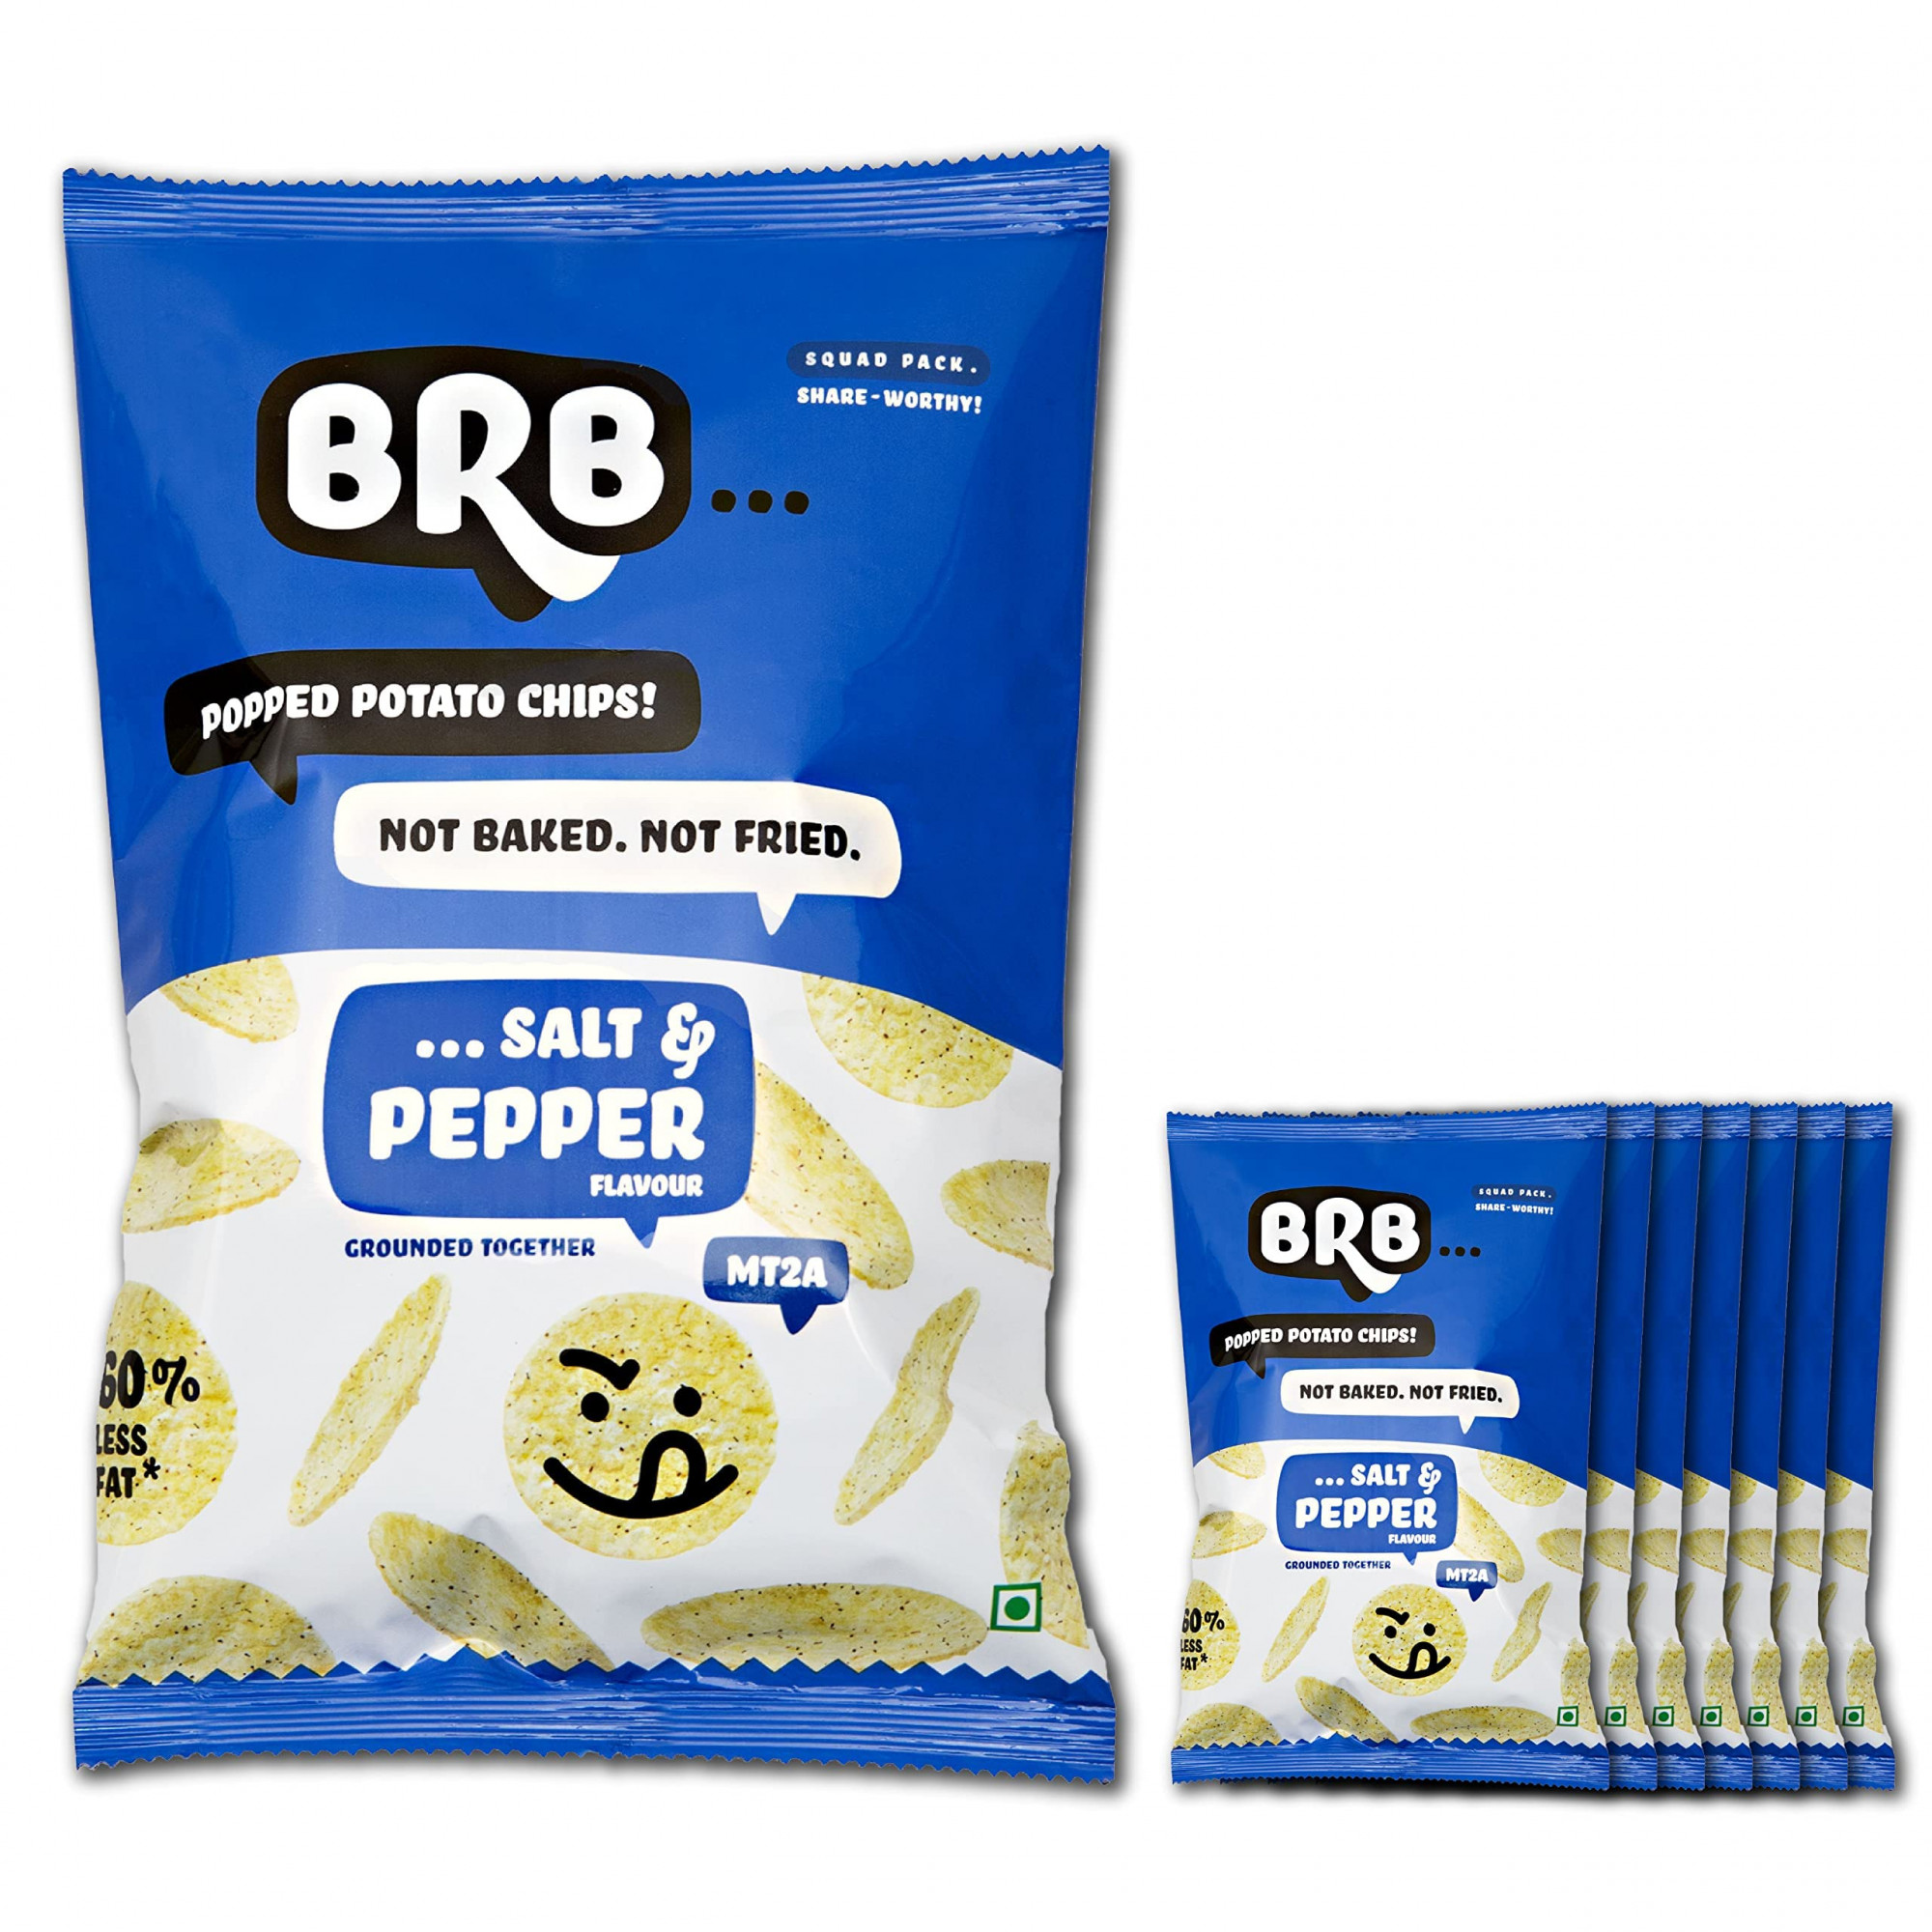 BRB Popped Potato Chips | Not Baked, Not Fried | Salt & Pepper Flavours | 8 Packs X 48 Grams | 60% Less Fat | Low Calorie | Healthy Snack